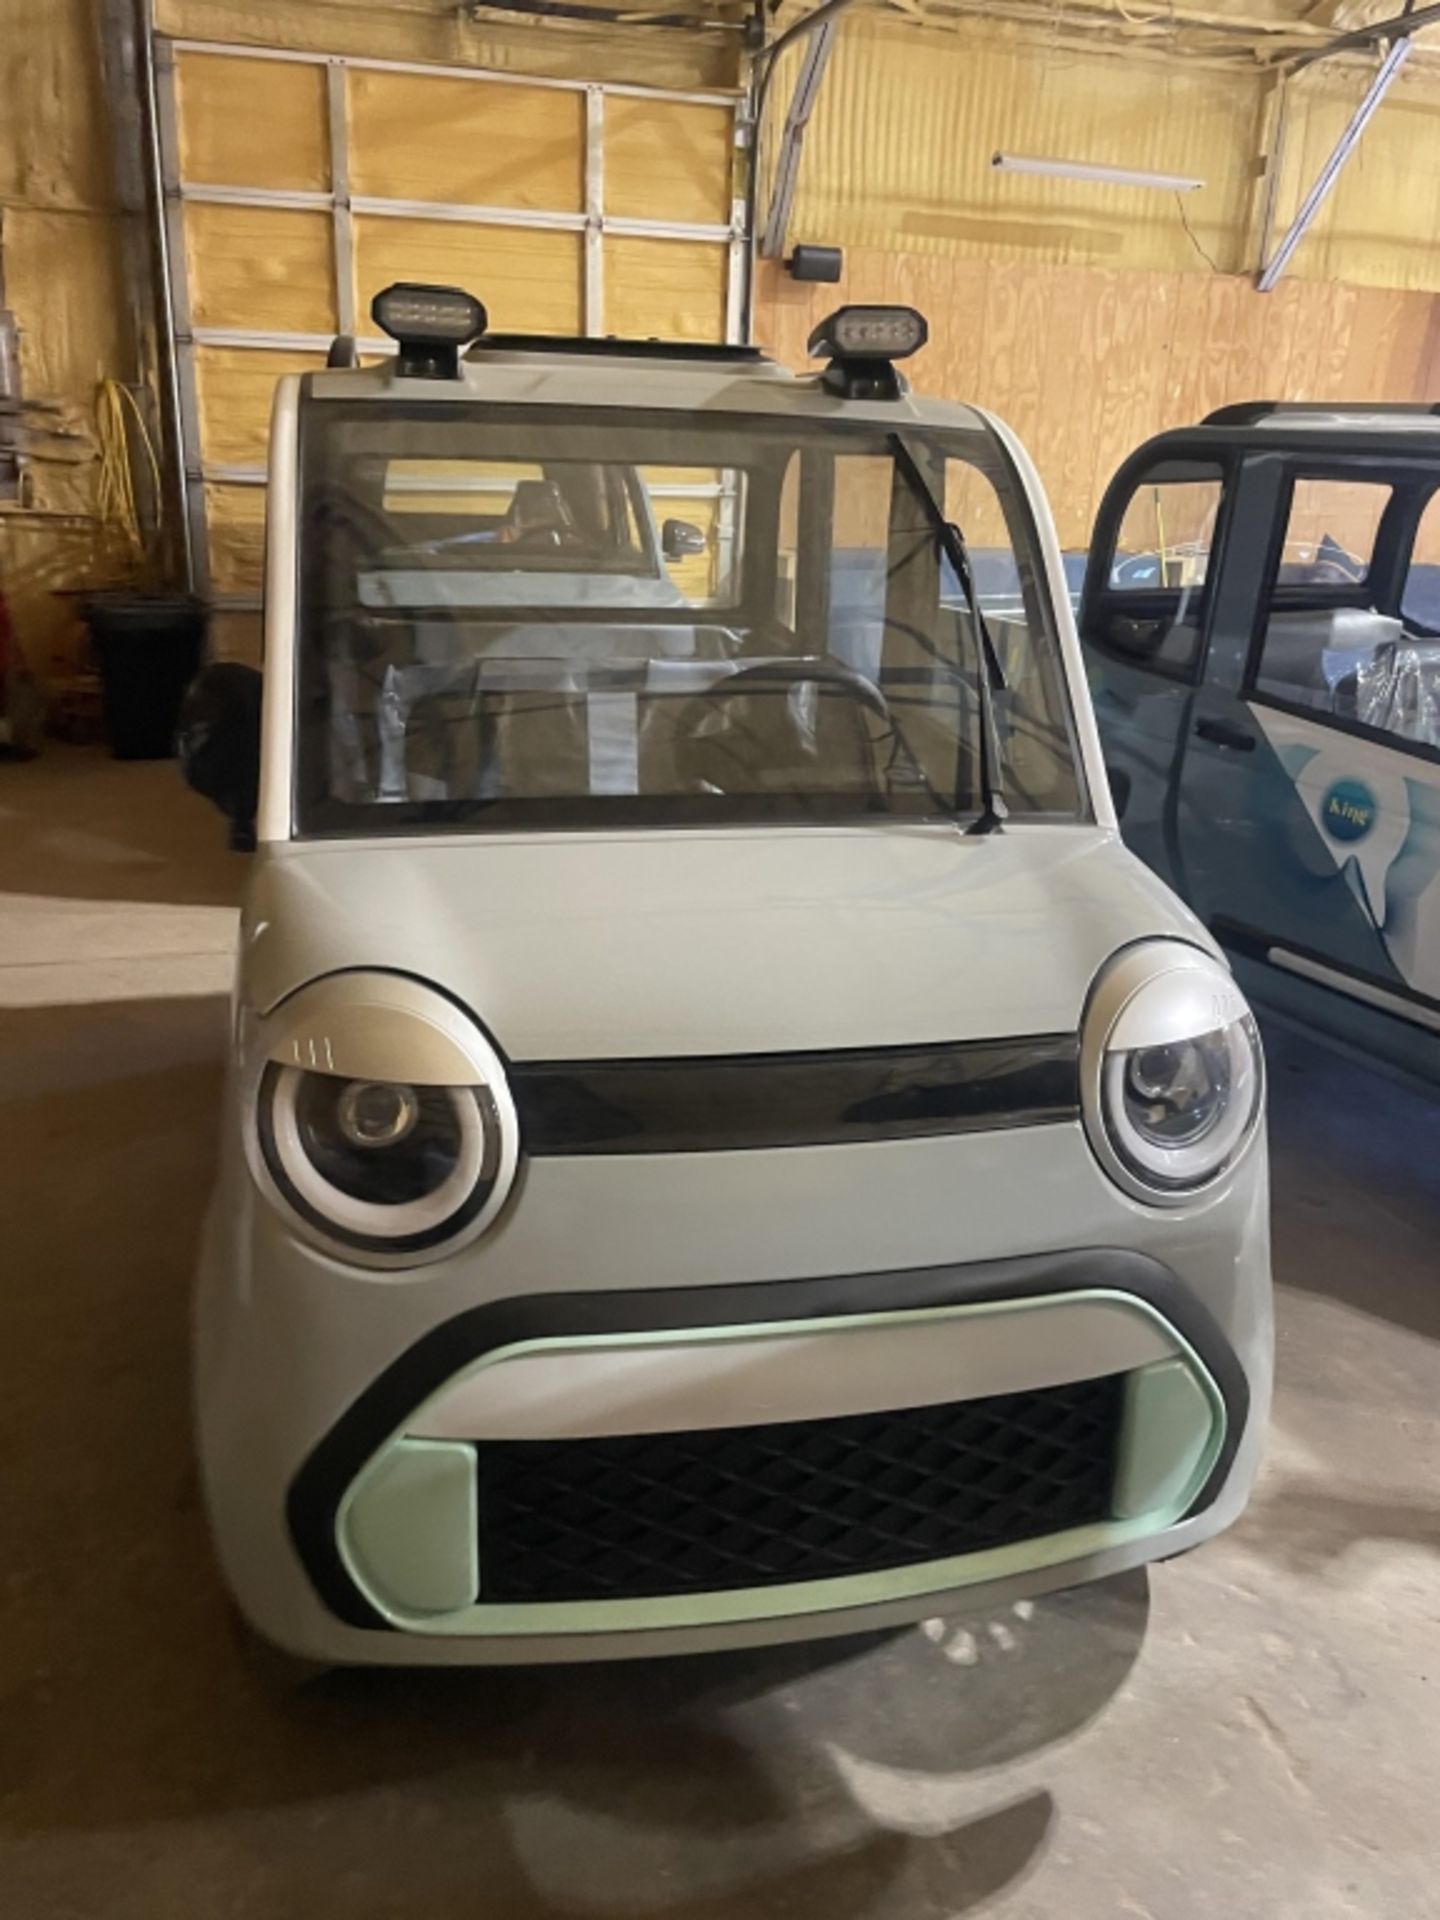 MECO M-F Electric Vehicle - Image 8 of 18